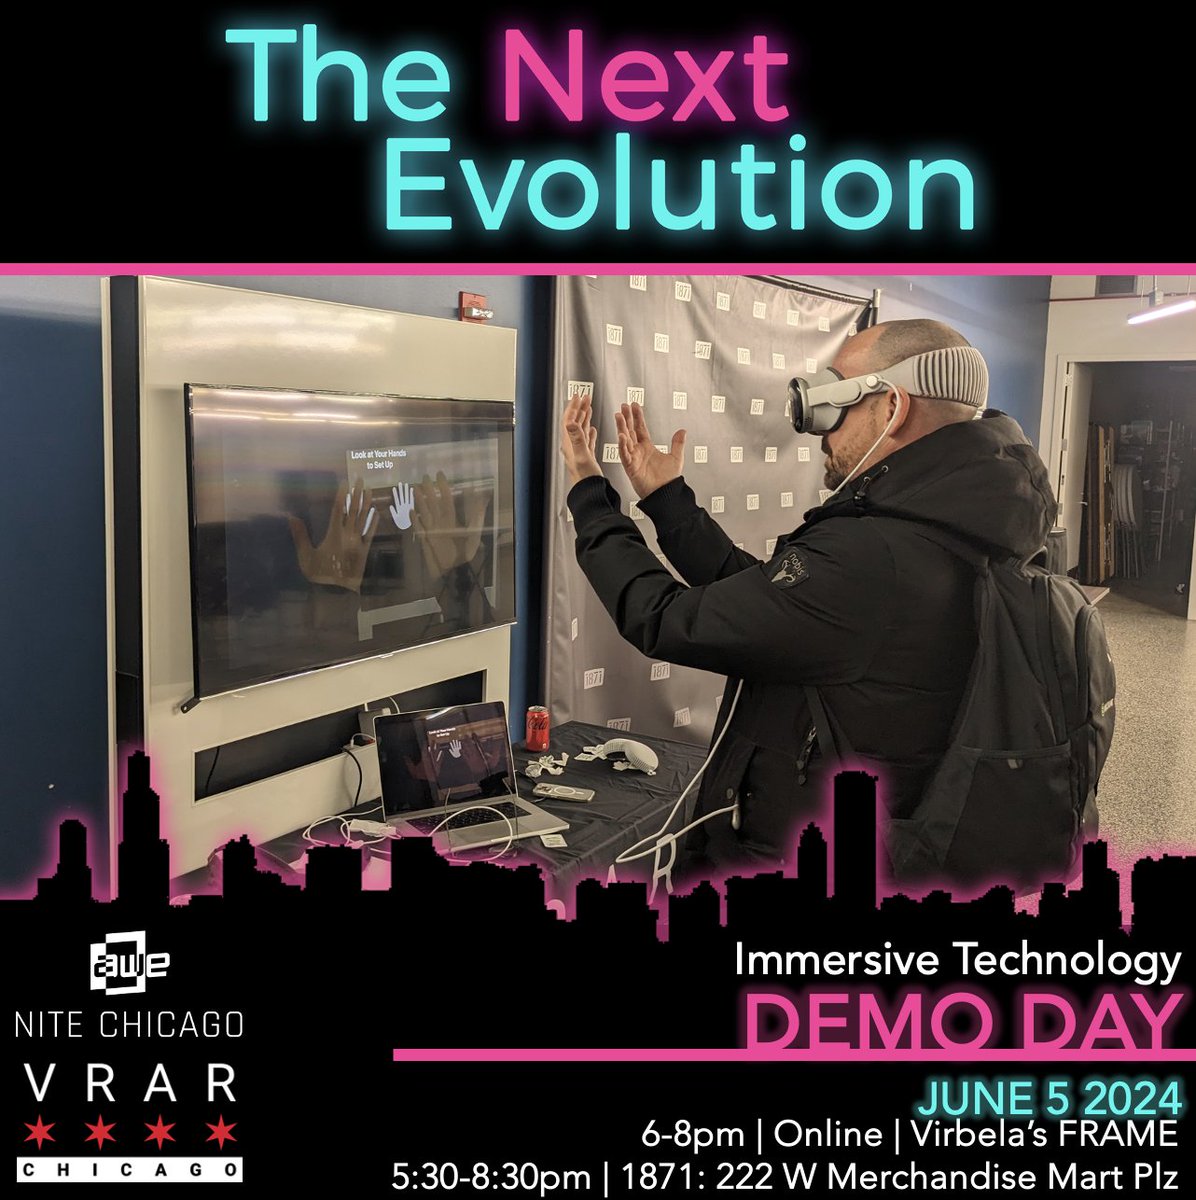 We are going to fill a room of the best representations of immersive technologies for the Chicago community to get their hands and eyes on. Free to Attend. 

#TheNextEvolution #AR #VR #SpatialComputing #Demonstration #Chicago #applevisionpro #apple #Meta #Lenovo #HTC #MagicLeap